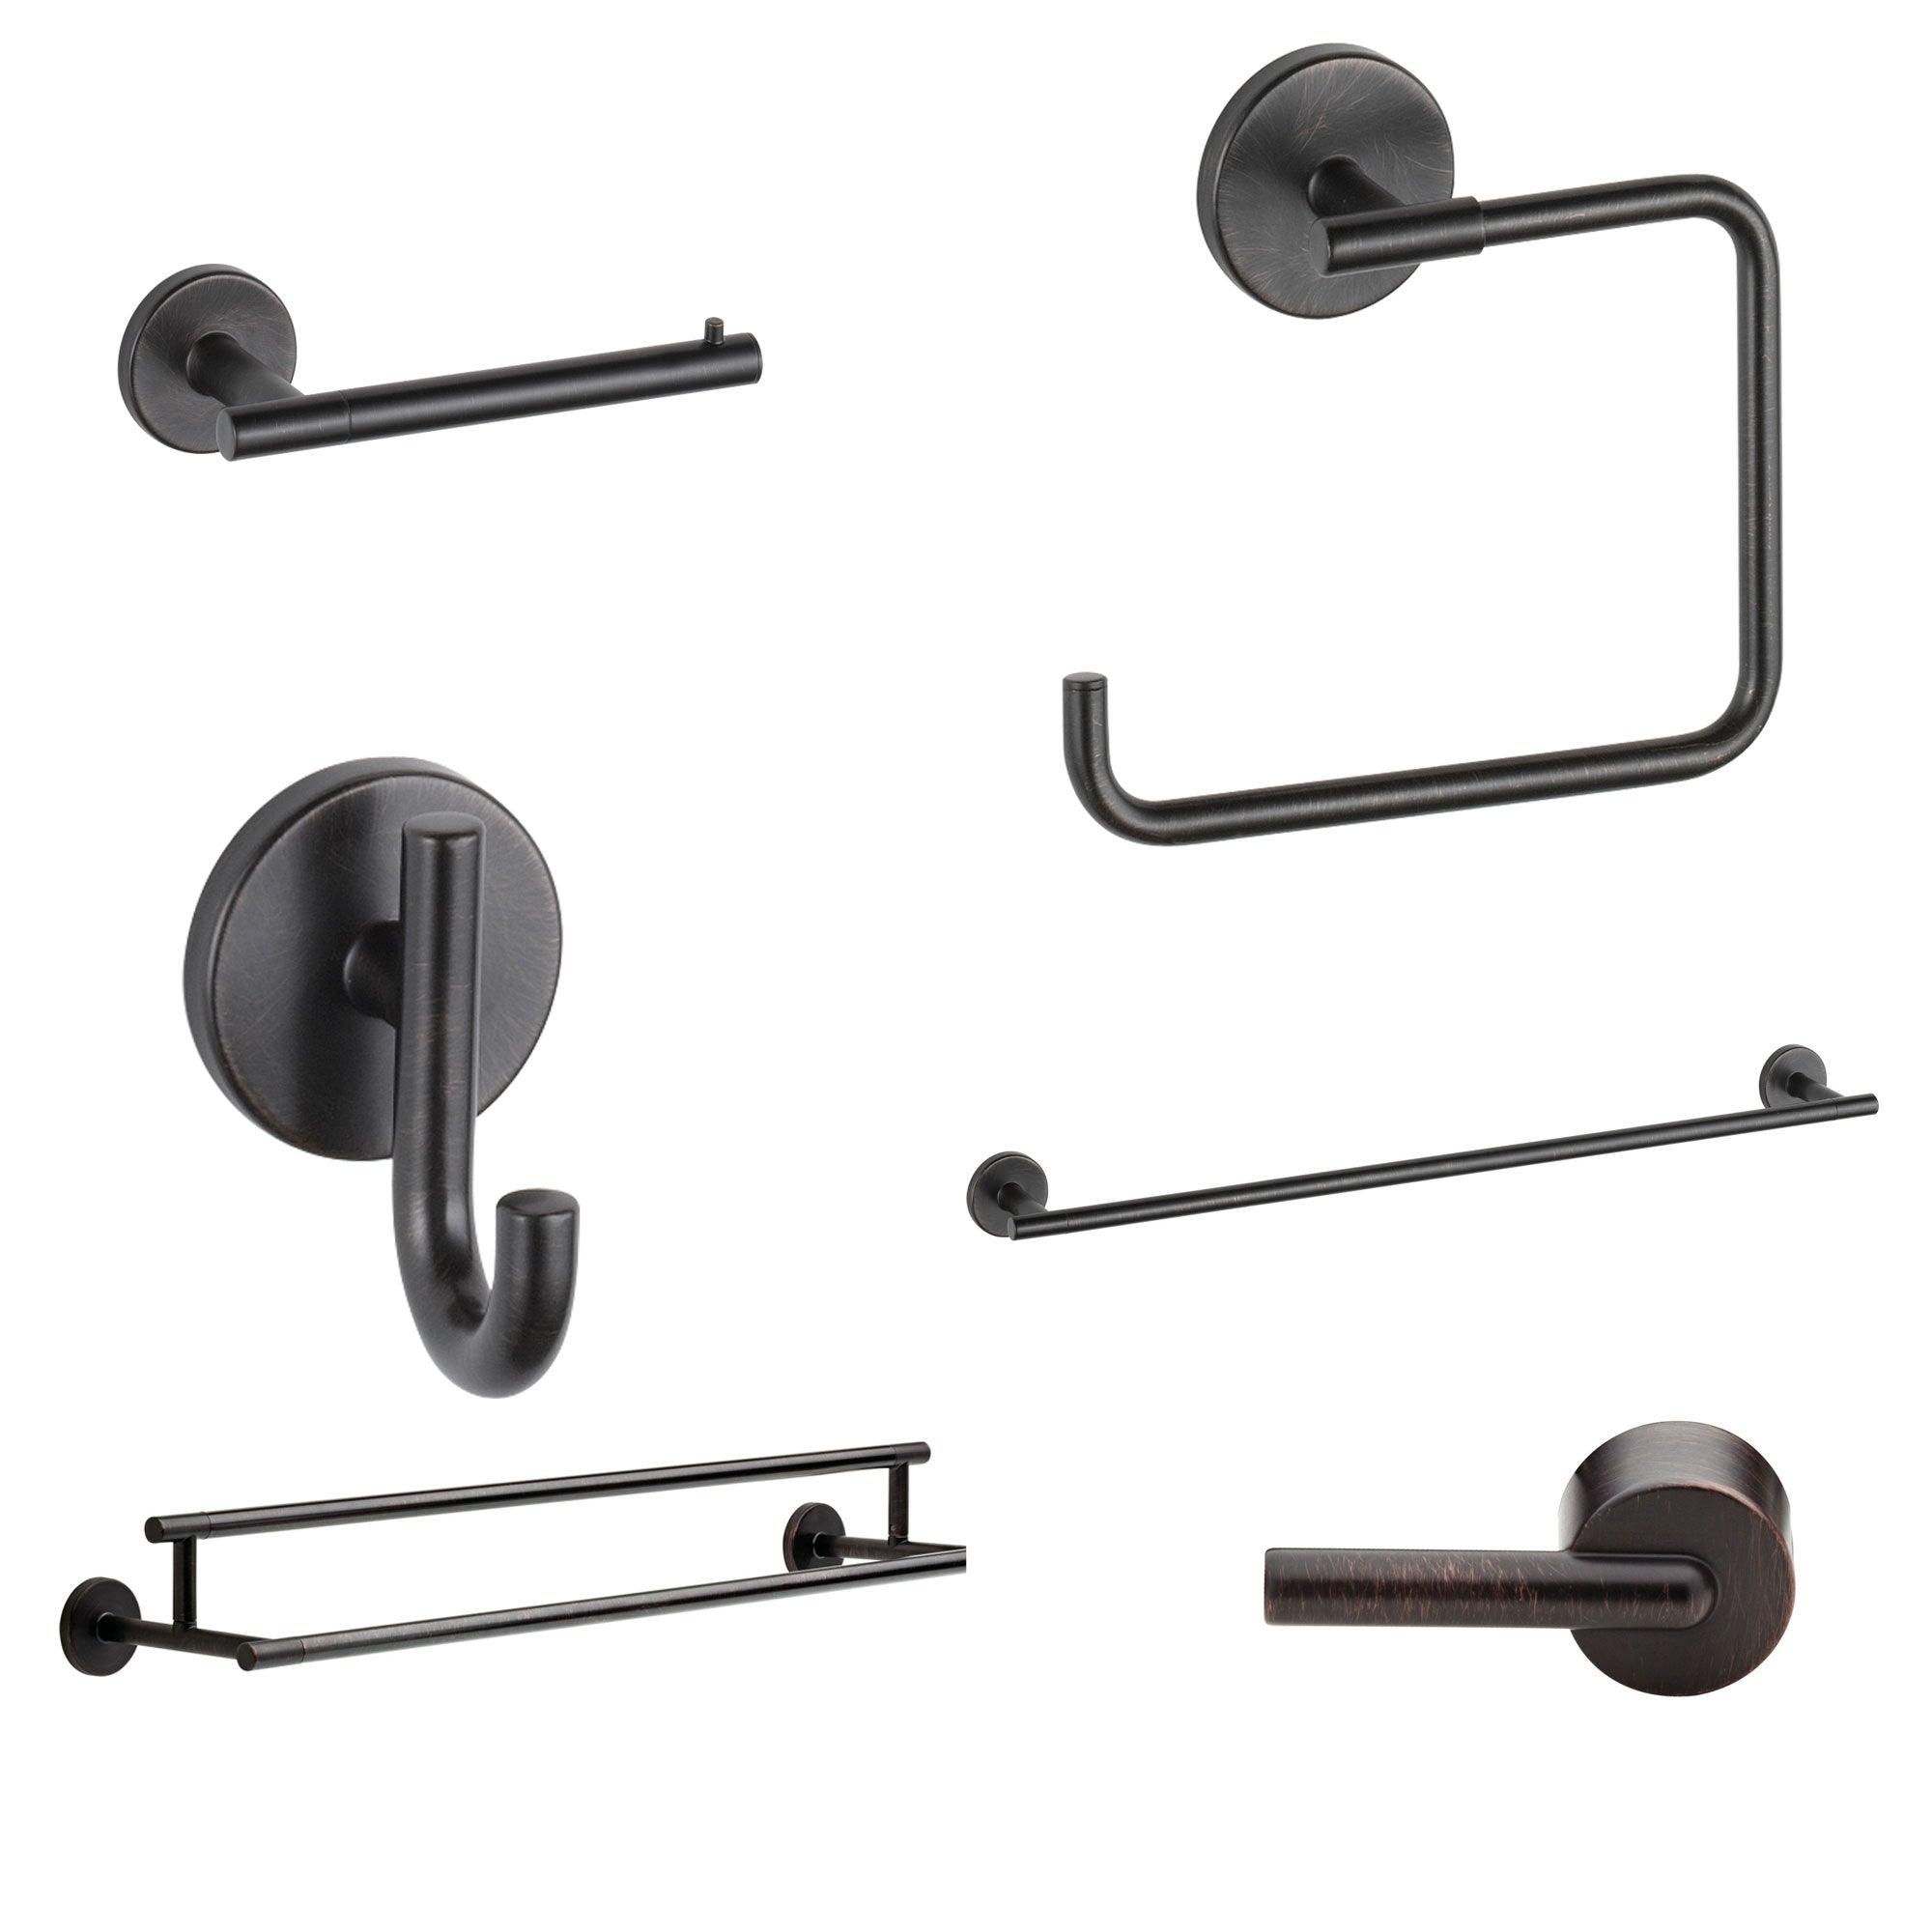 Delta Trinsic Venetian Bronze DELUXE Accessory Set Includes: 24" Double and Single Towel Bar, Paper Holder, Towel Ring, Robe Hook, Tank Lever D10012AP